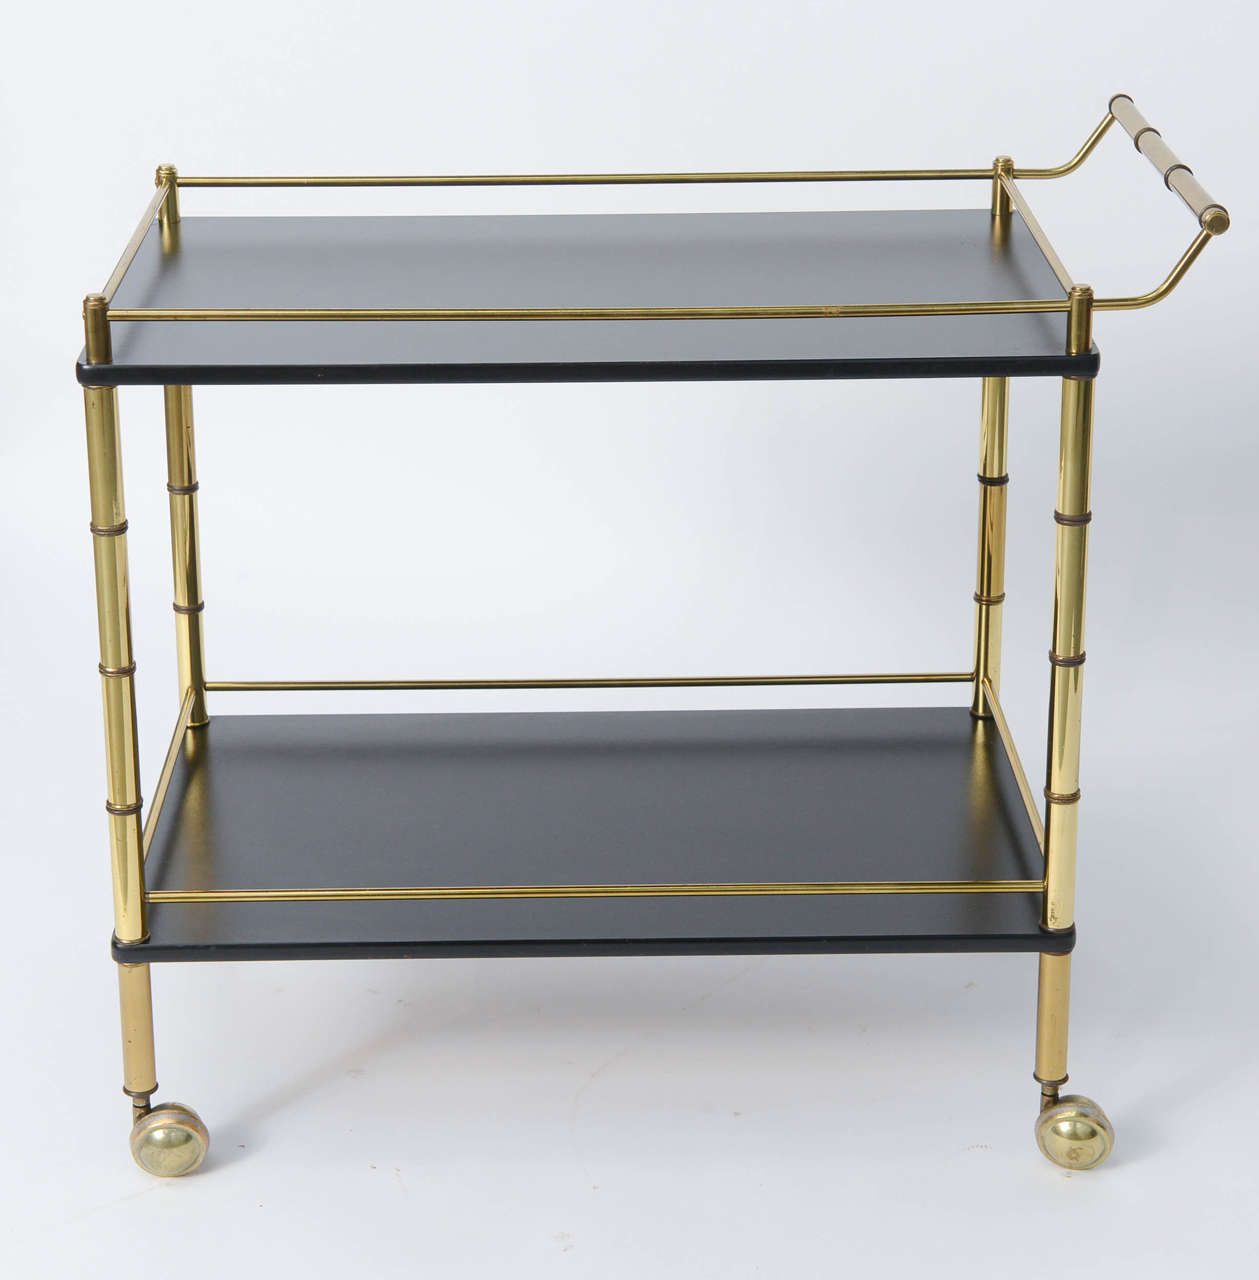 Stylish and quite utile, this 1950s-1960s bar or tea cart makes a fine and elegant statement whether parked or serving on the move. Brass with a faux bamboo motif, black lacquered top and bottom levels, both with brass rod gallery edges all on